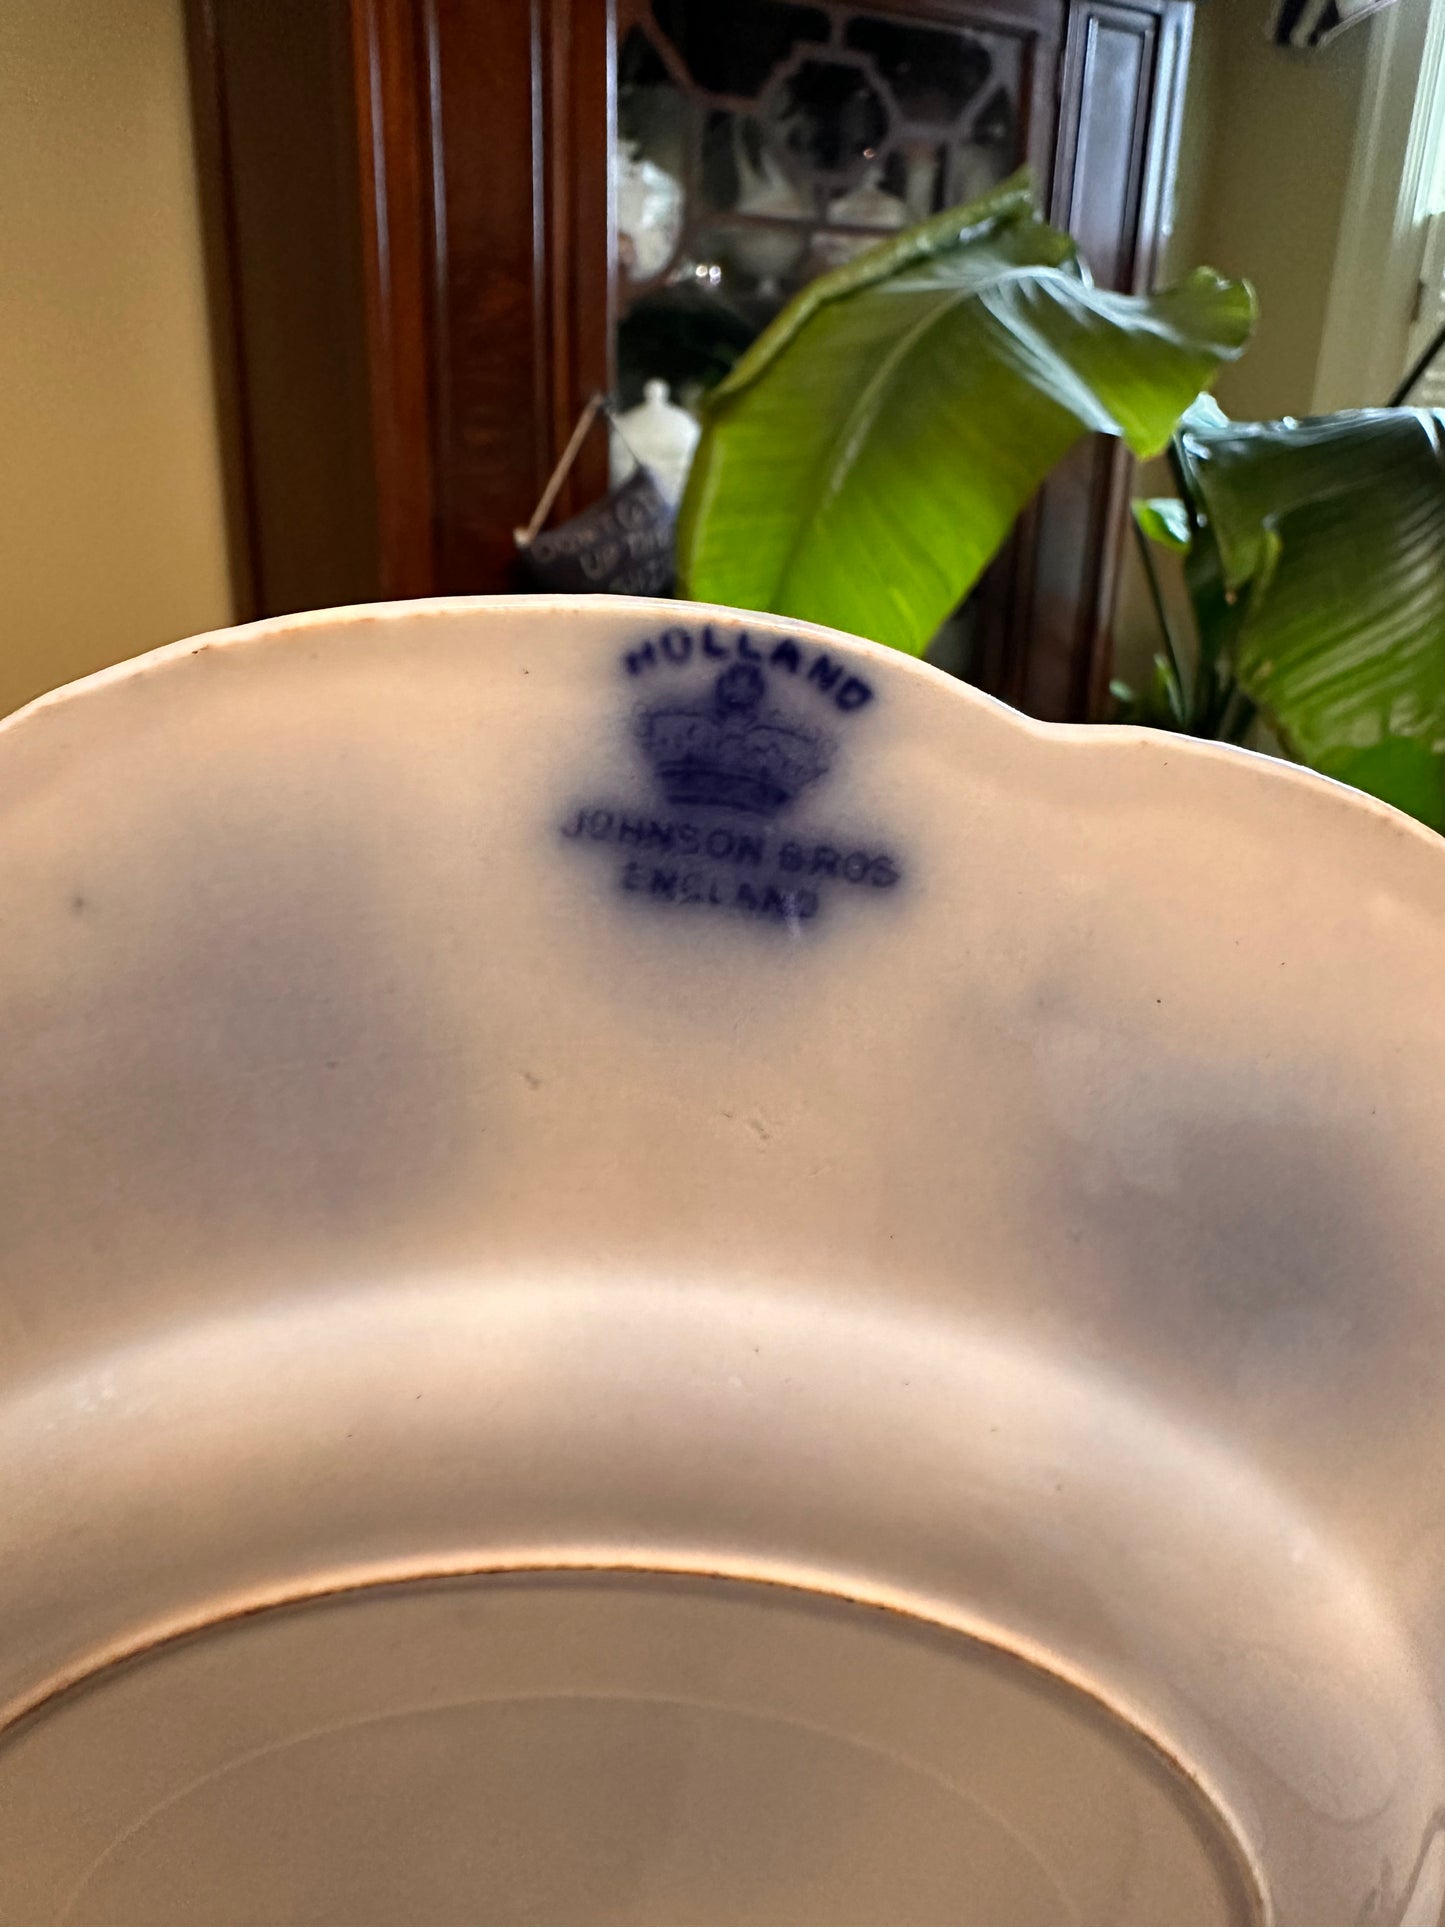 Johnson Brothers Holland Dinner Plate